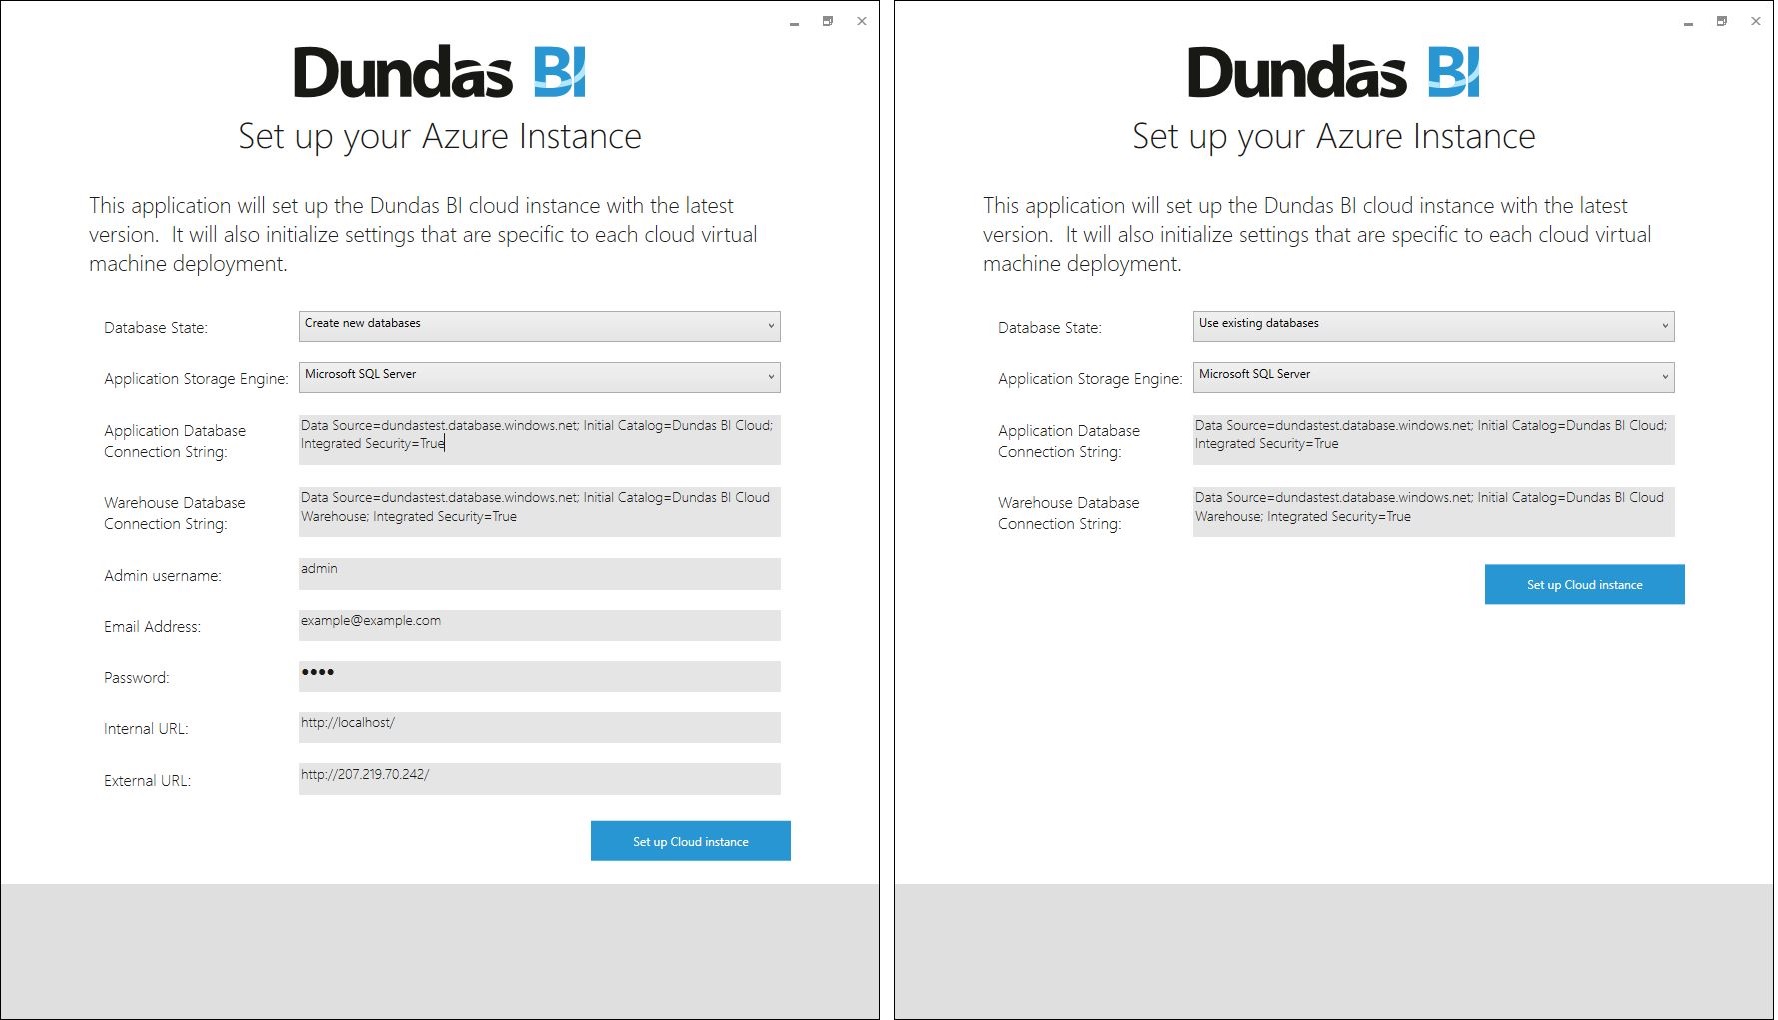 Set up your Azure instance - new databases at left, existing databases at right